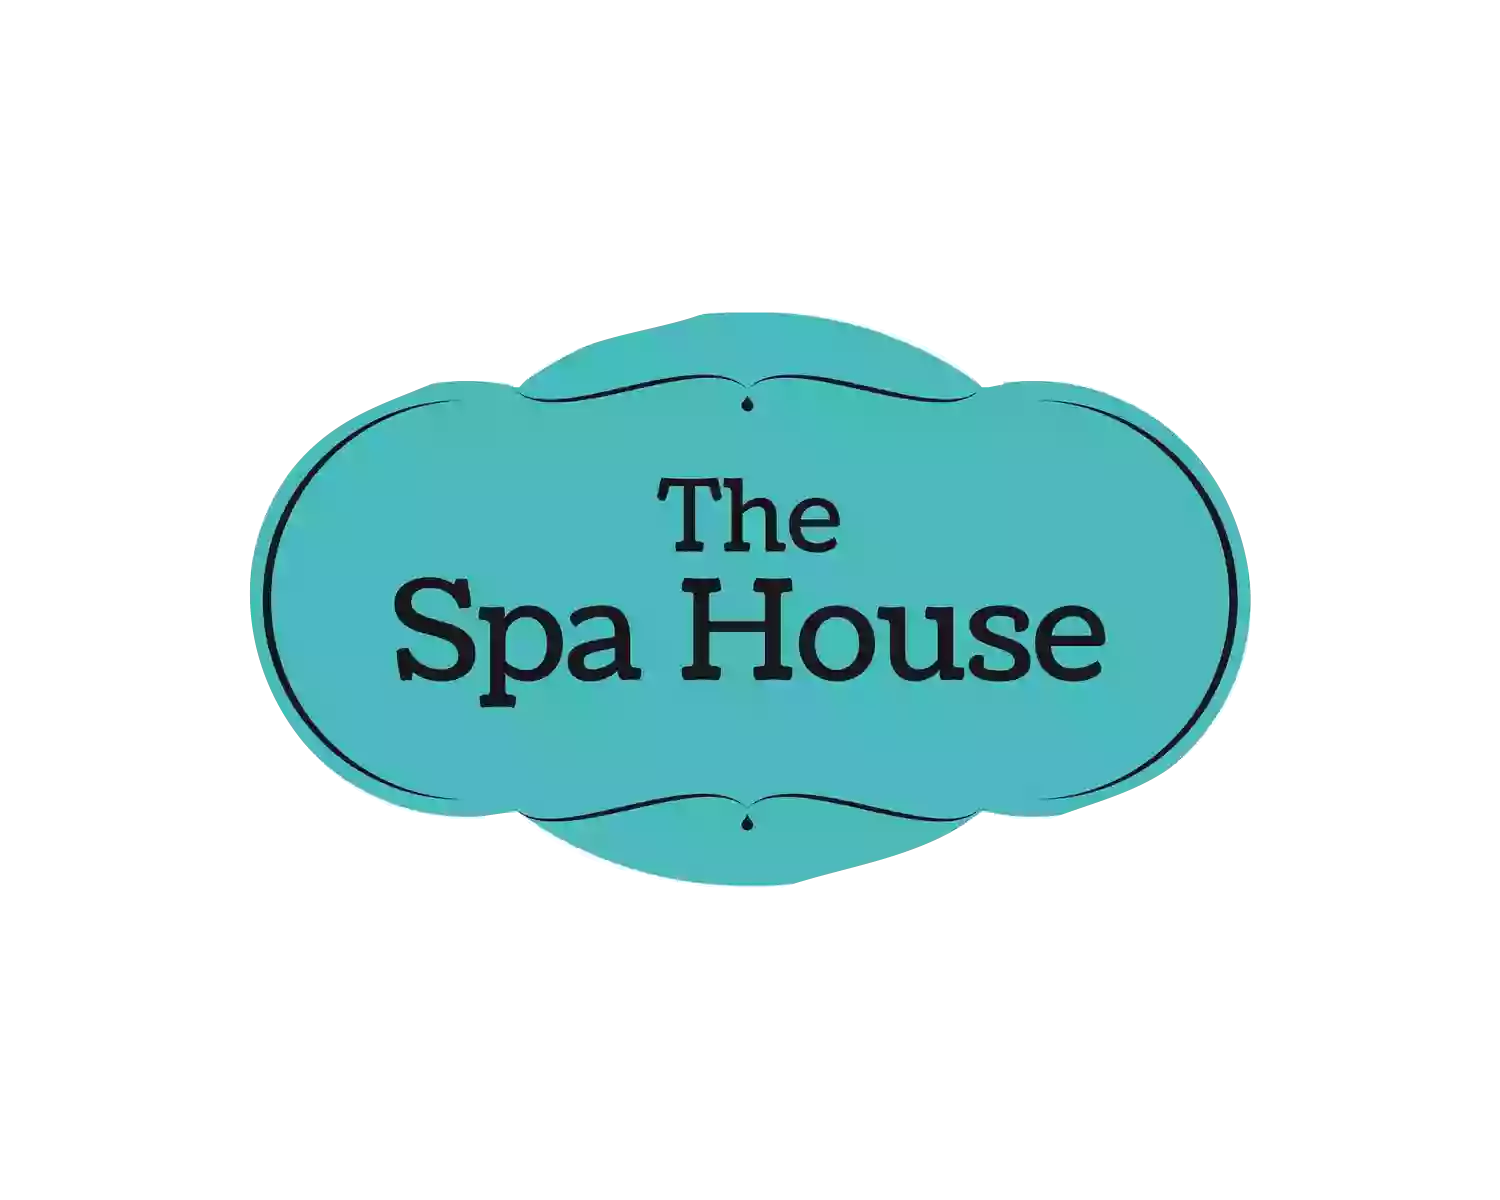 The Spa House